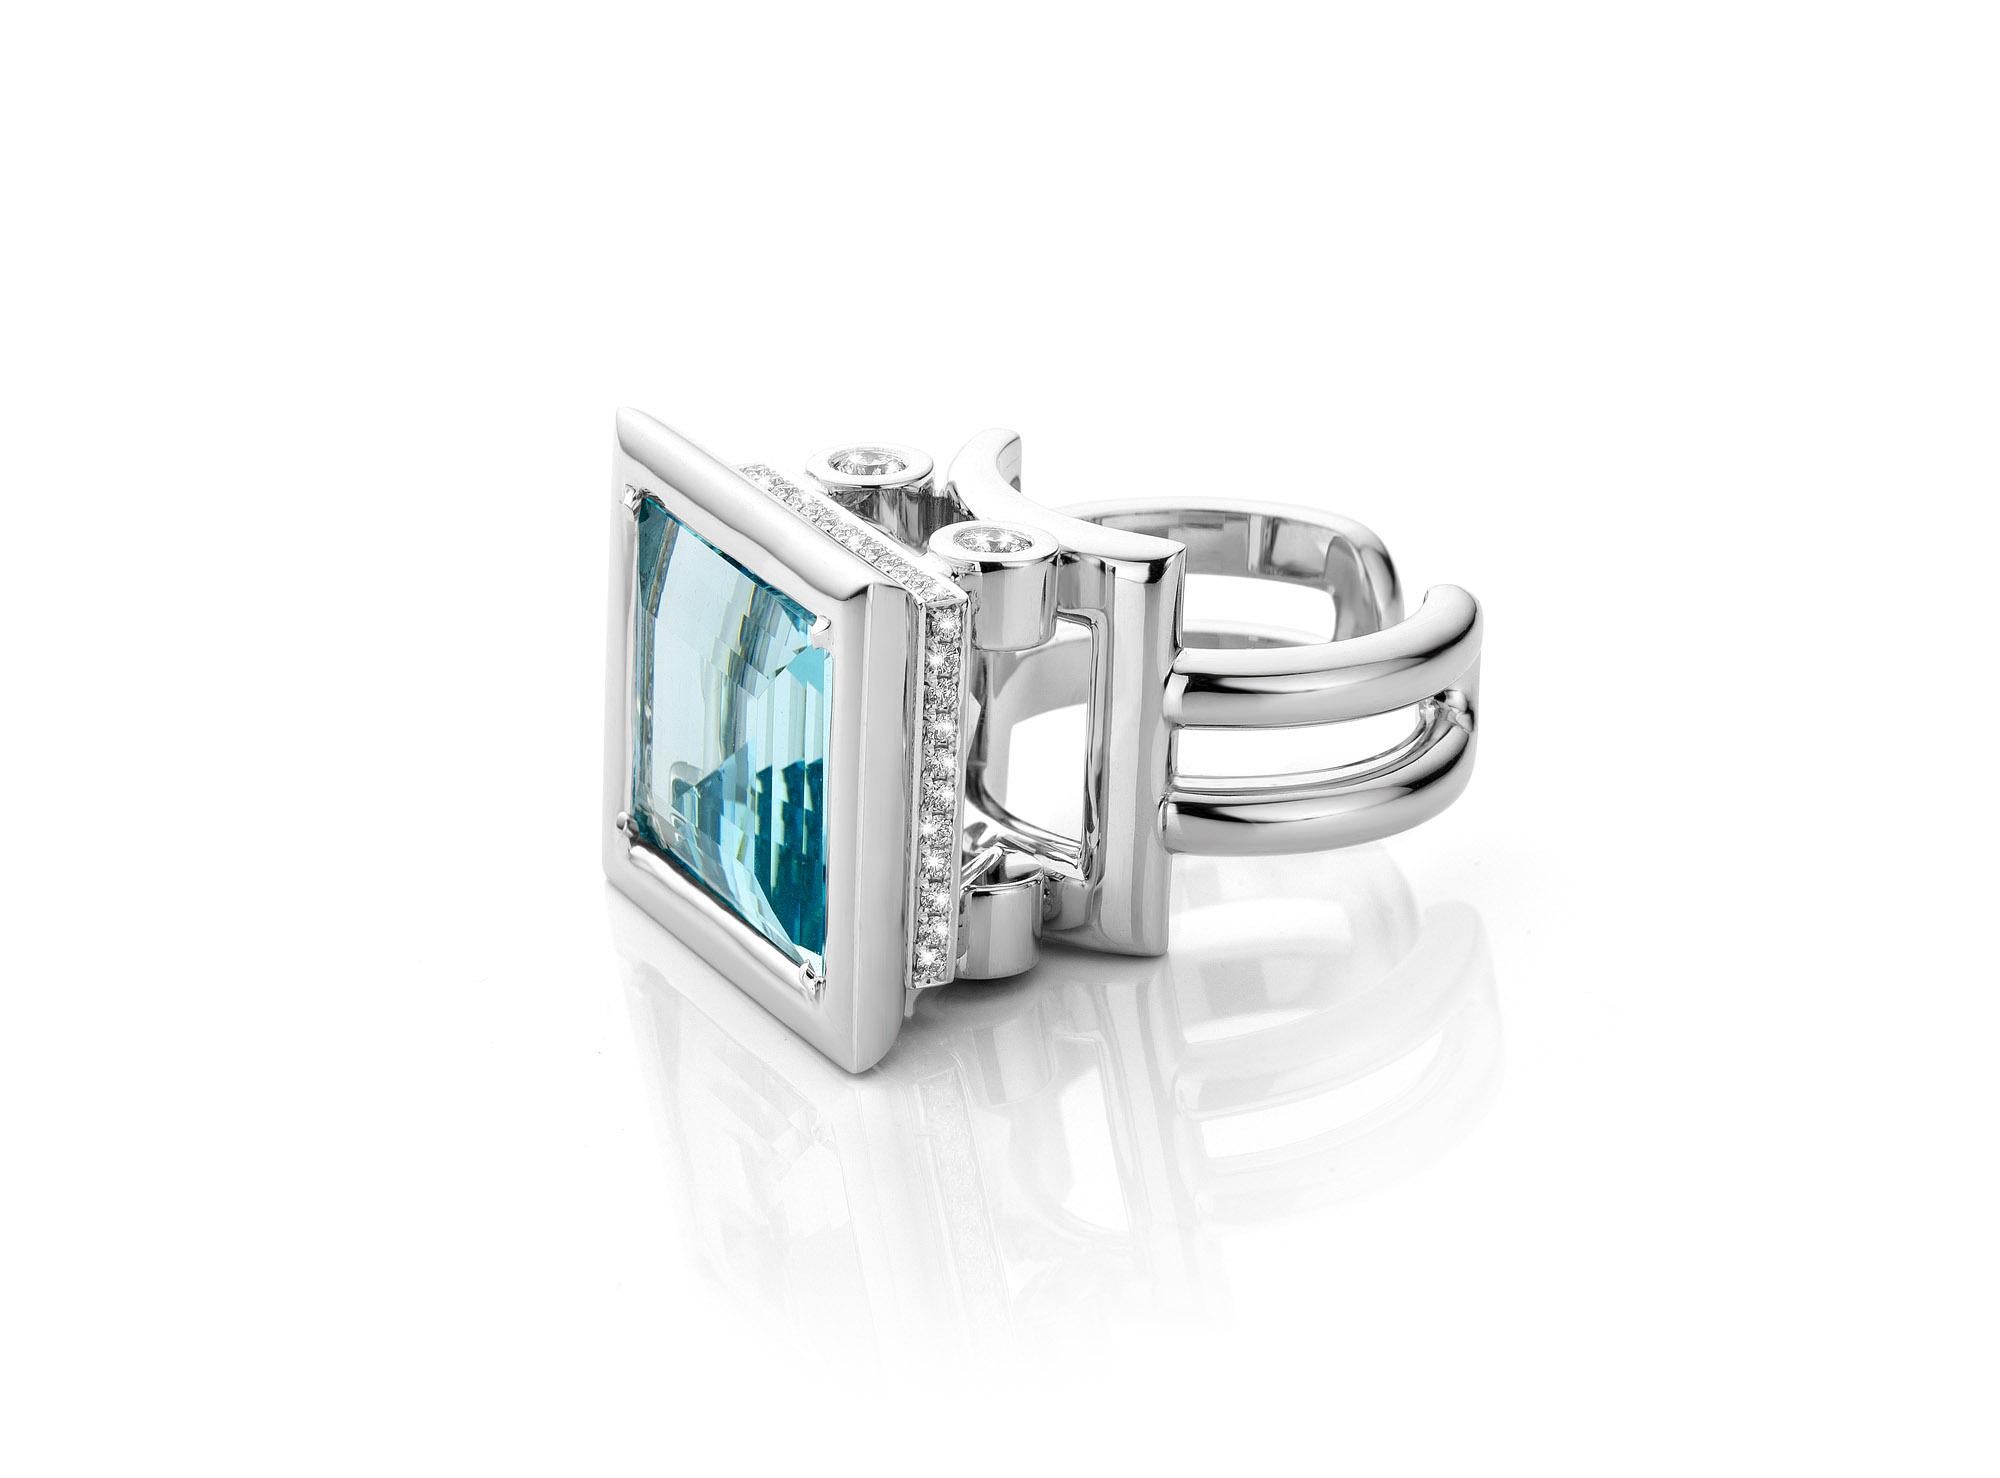 18 Karat White gold Cocktail Ring featuring a 28,4 carat Aquamarine stone.

Assher cut measuring 15,2 x 19,7 mm.
The Aquamarine Ring is set with 1,03 Carat Collection grade White Diamonds.

This is a one of a kind design made by Jochen Leën.
This